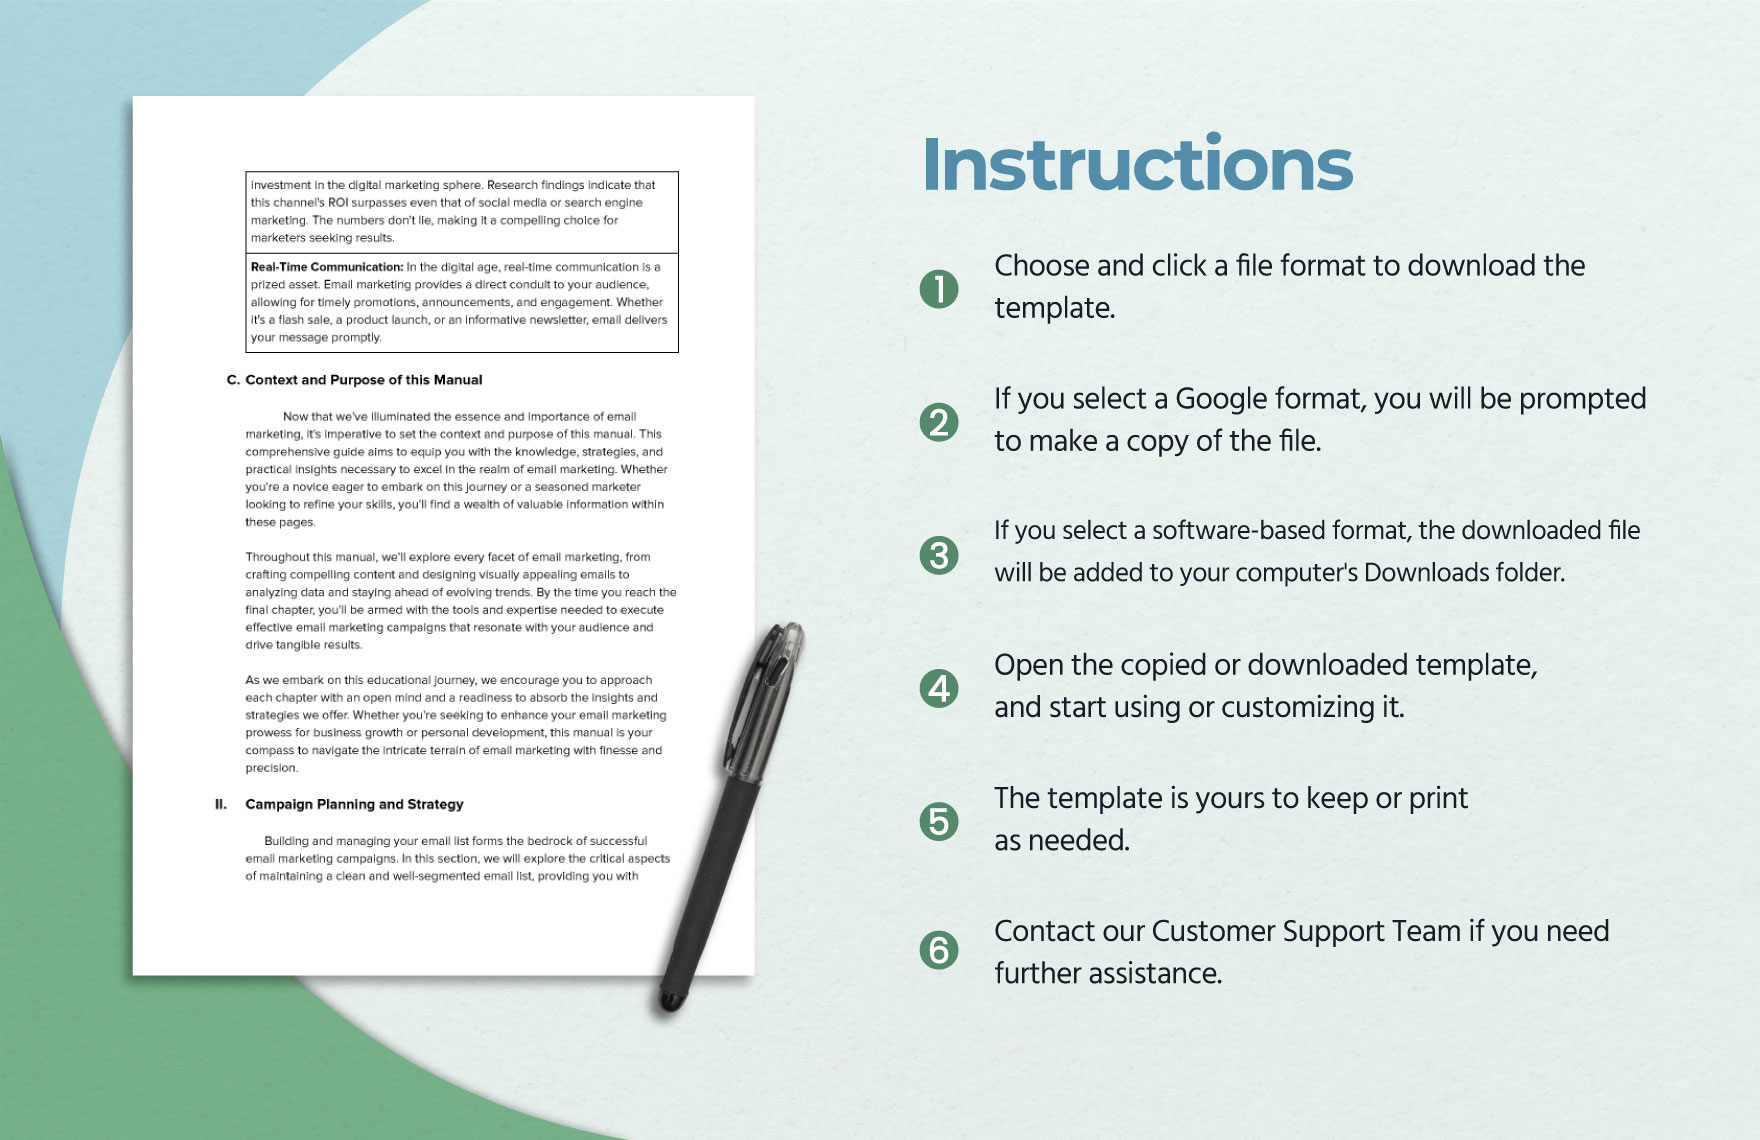 Email Marketing Manual Template